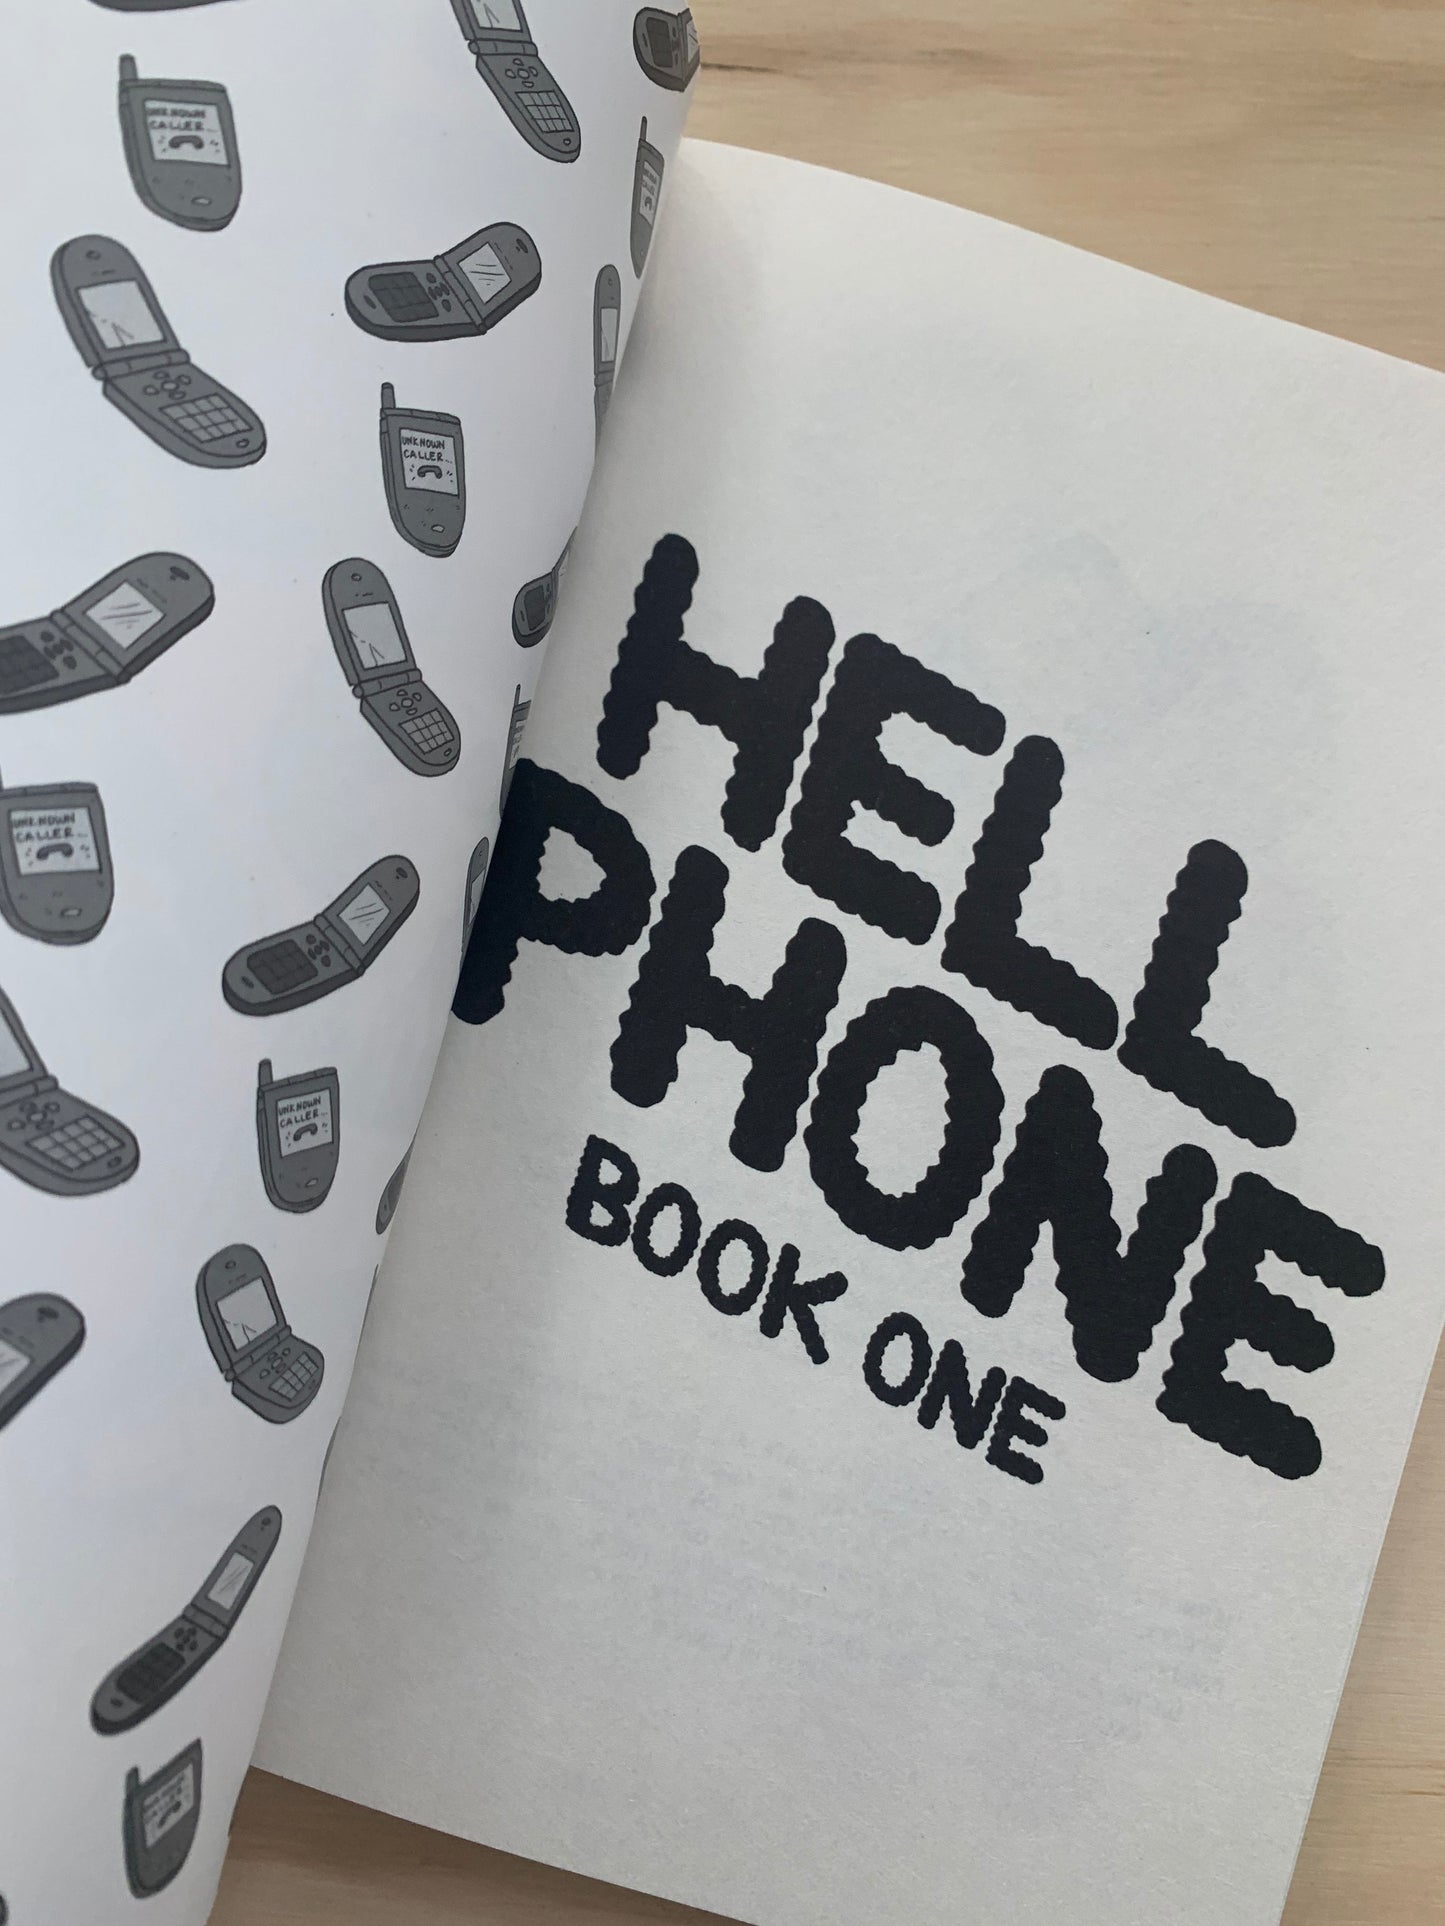 Hell Phone, Book One